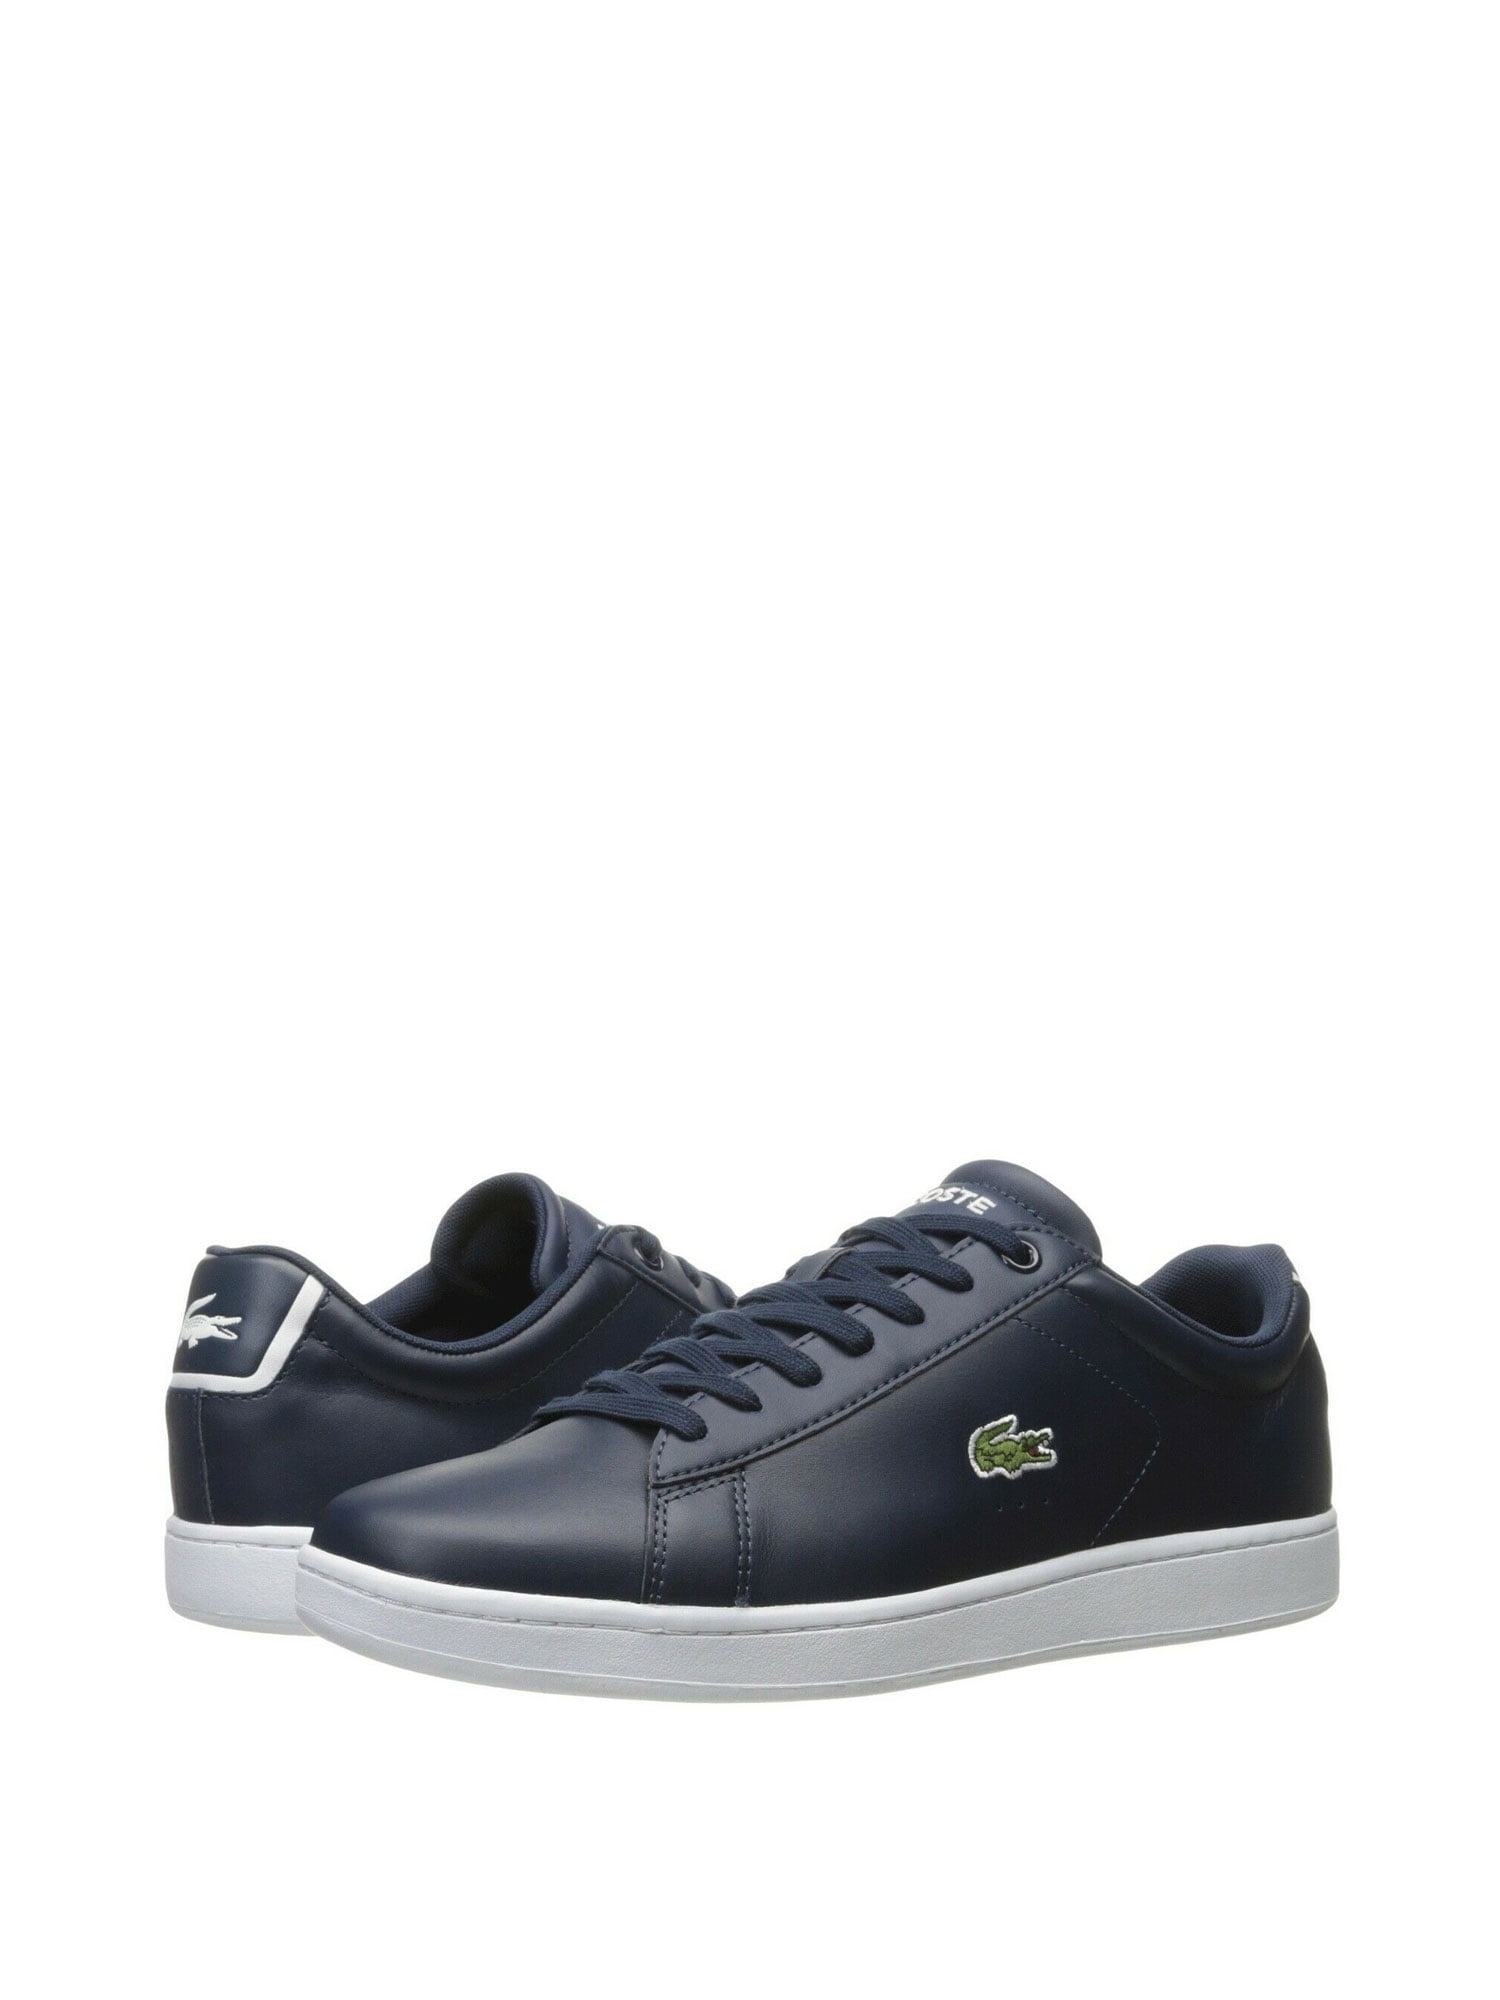 Lacoste Mens Carnaby EVO Trainers Navy White Leather Textile Shoes All Sizes 